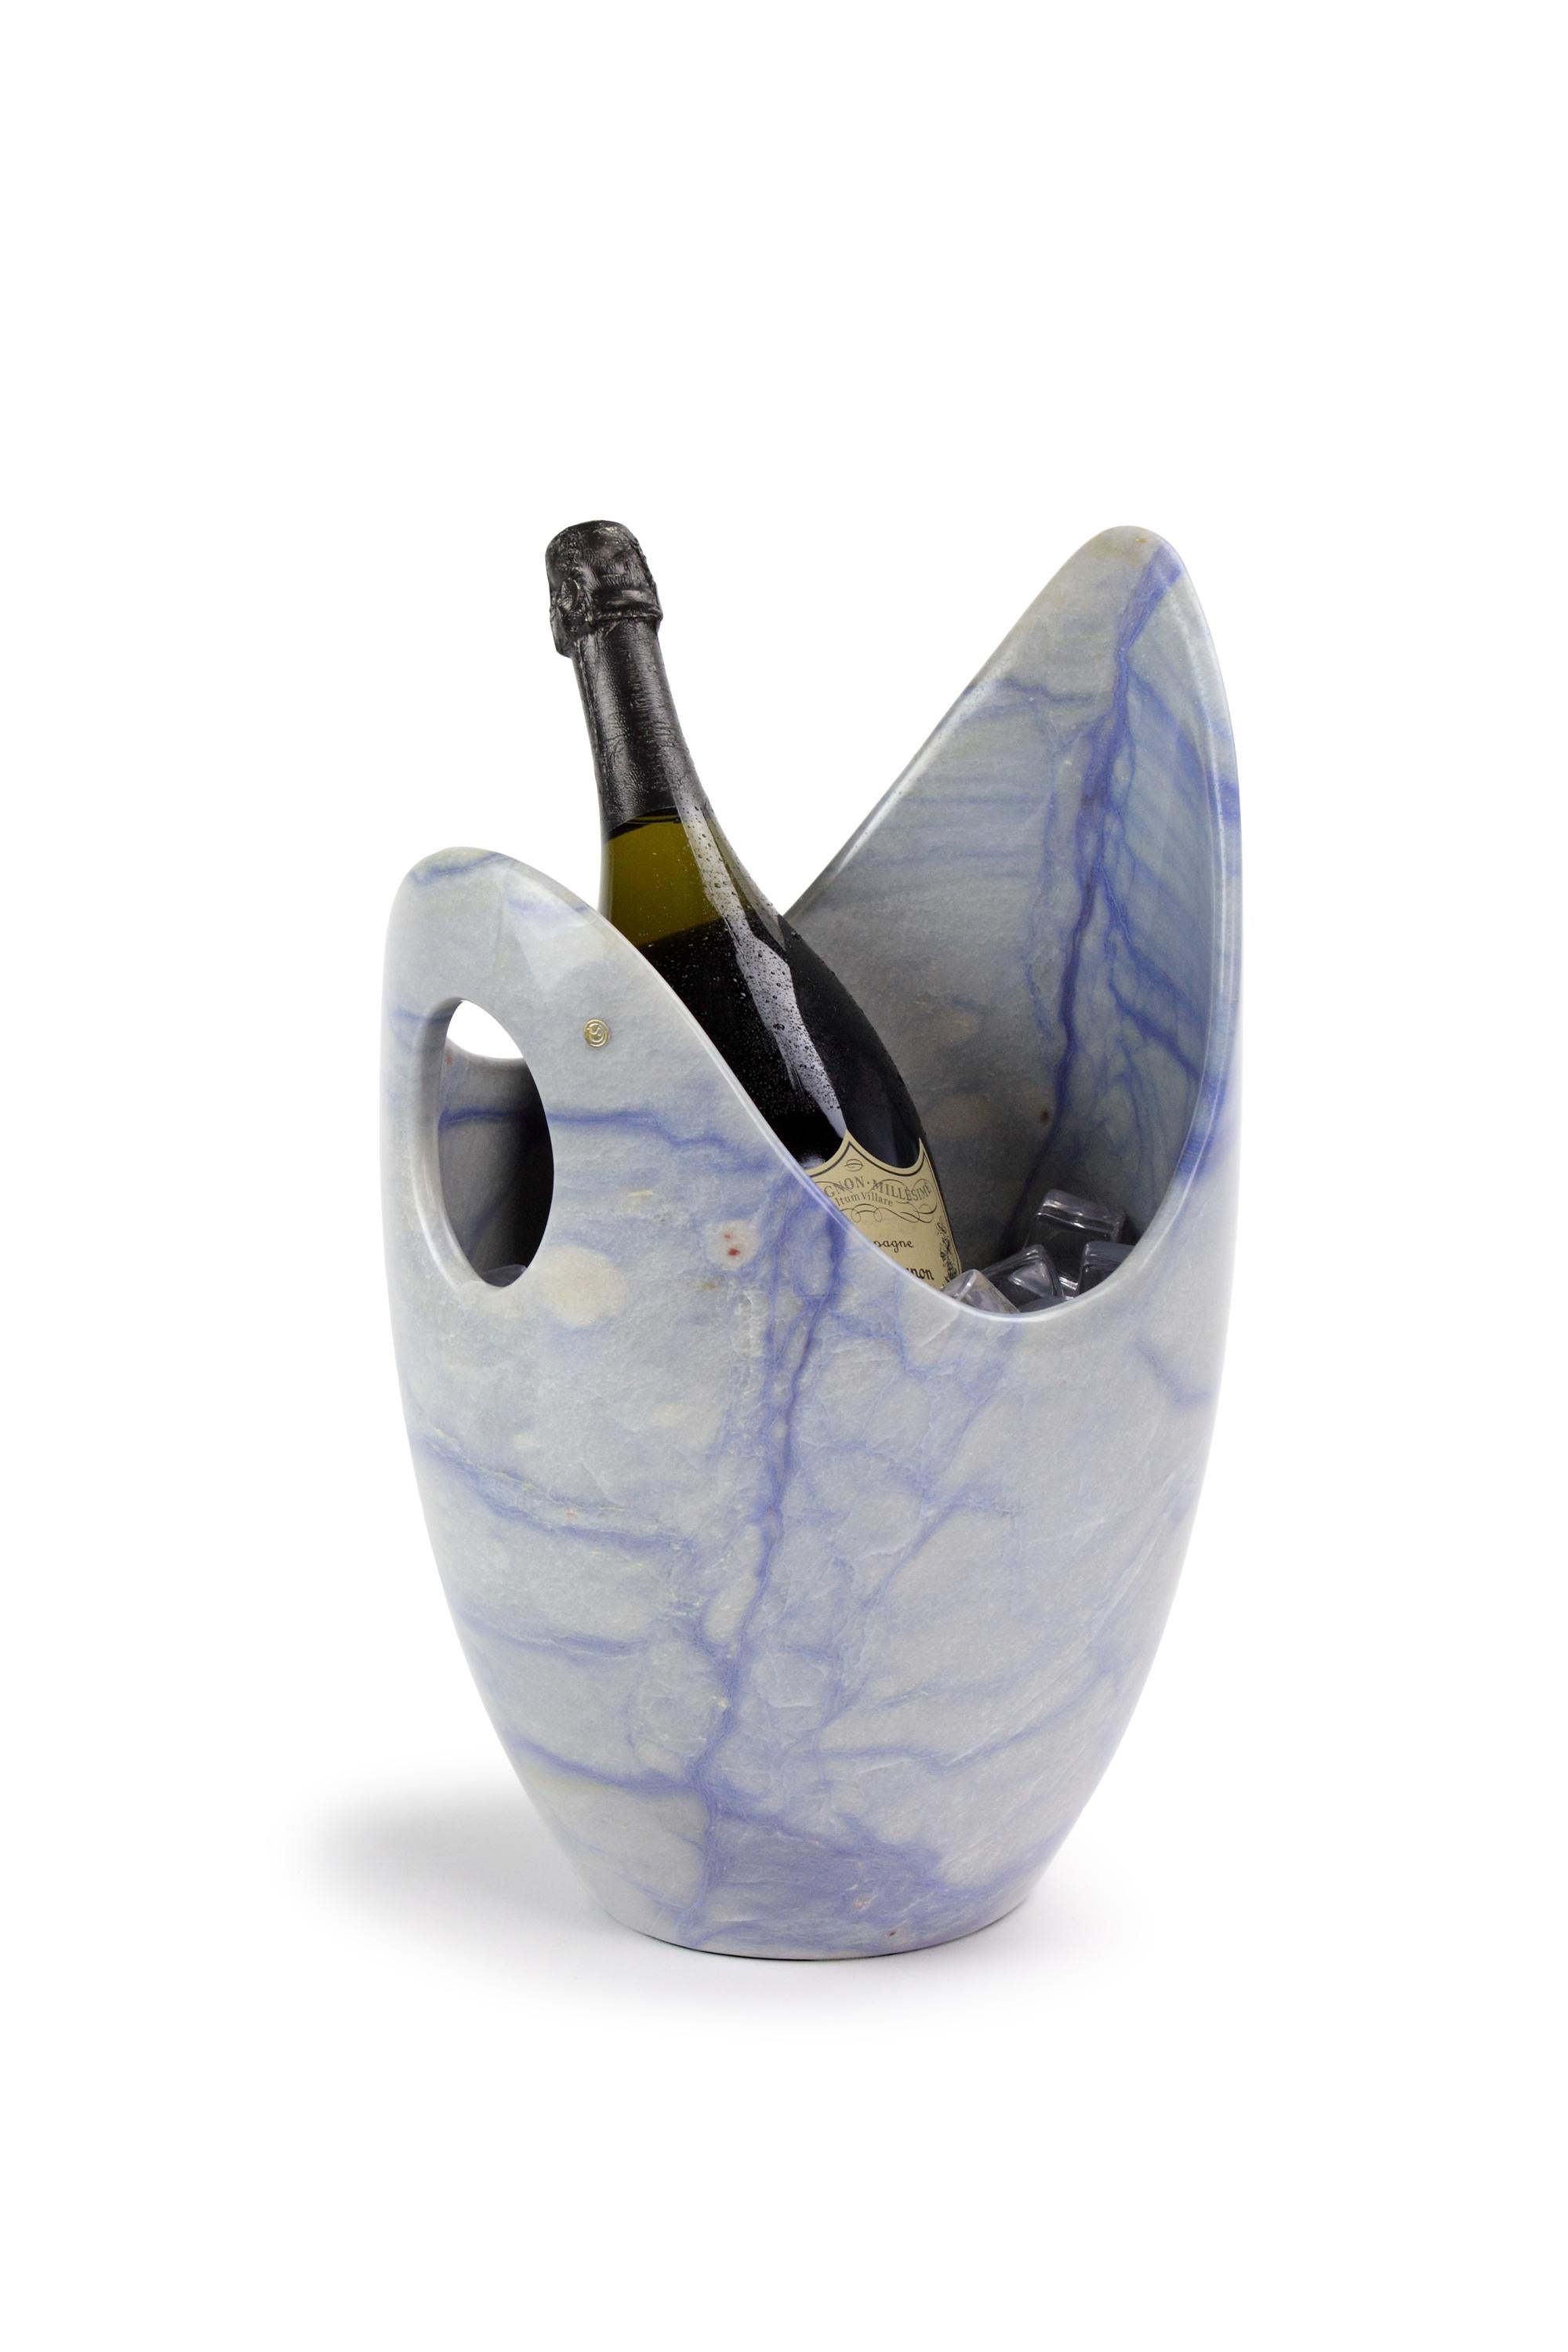 Luxurious and big Champagne bucket sculpted by hand from a solid block of Azul Macaubas. Polished finishing. 

Champagne bucket dimensions: D 26 x H 41 cm. Available in different quartzite, onyx and marbles. 

Limited edition of 50.

Each champagne